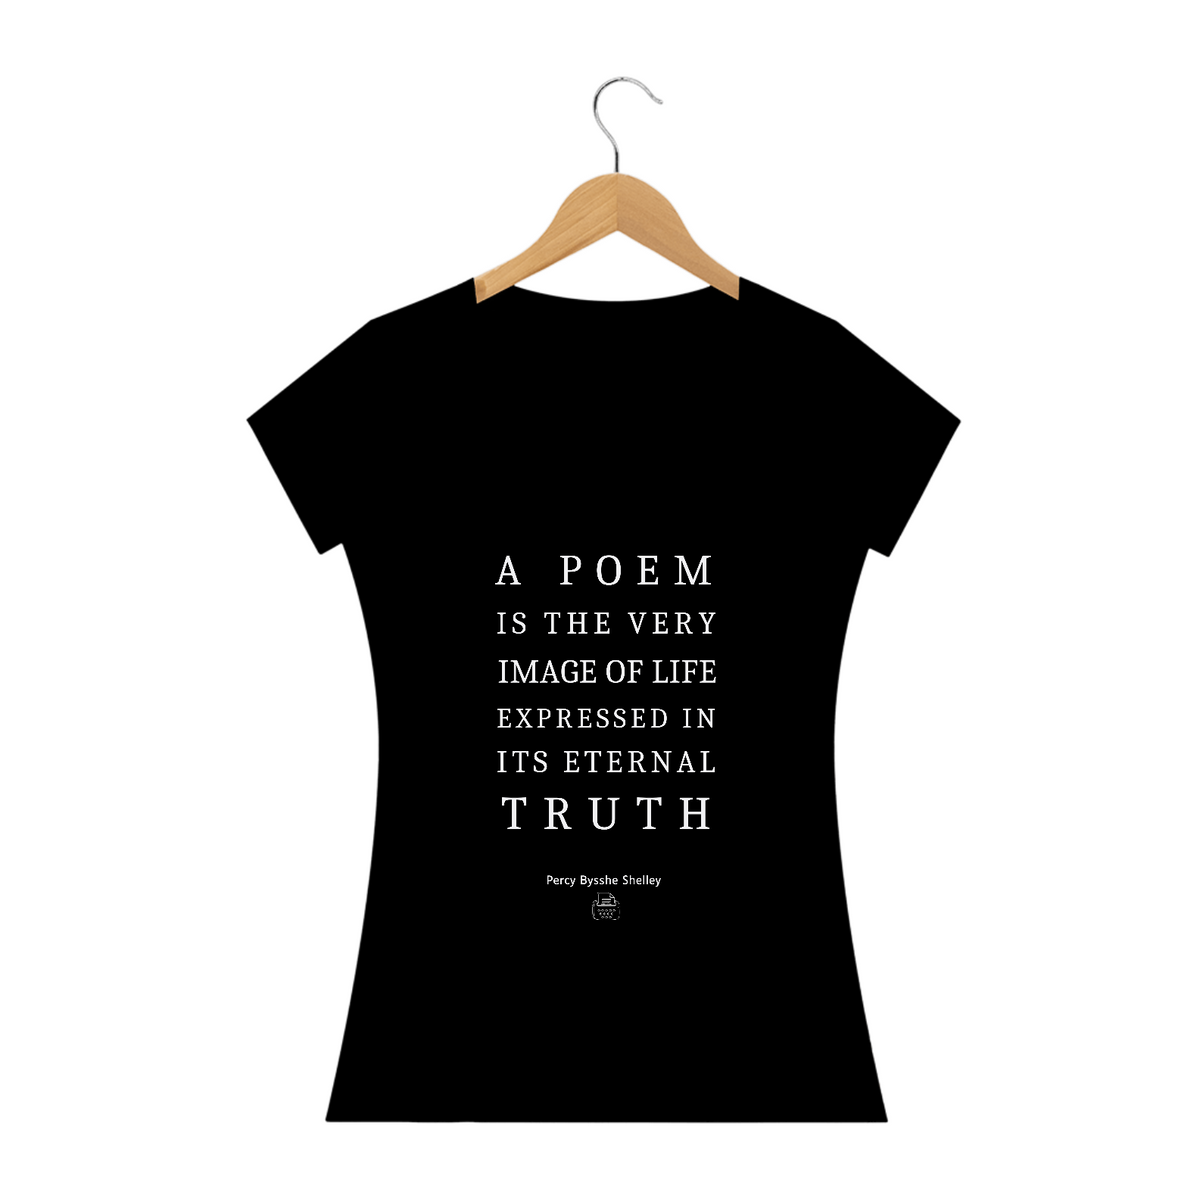 Nome do produto: A poem is the very image of life, Percy B. Shelley Baby Long Quality (Preto)